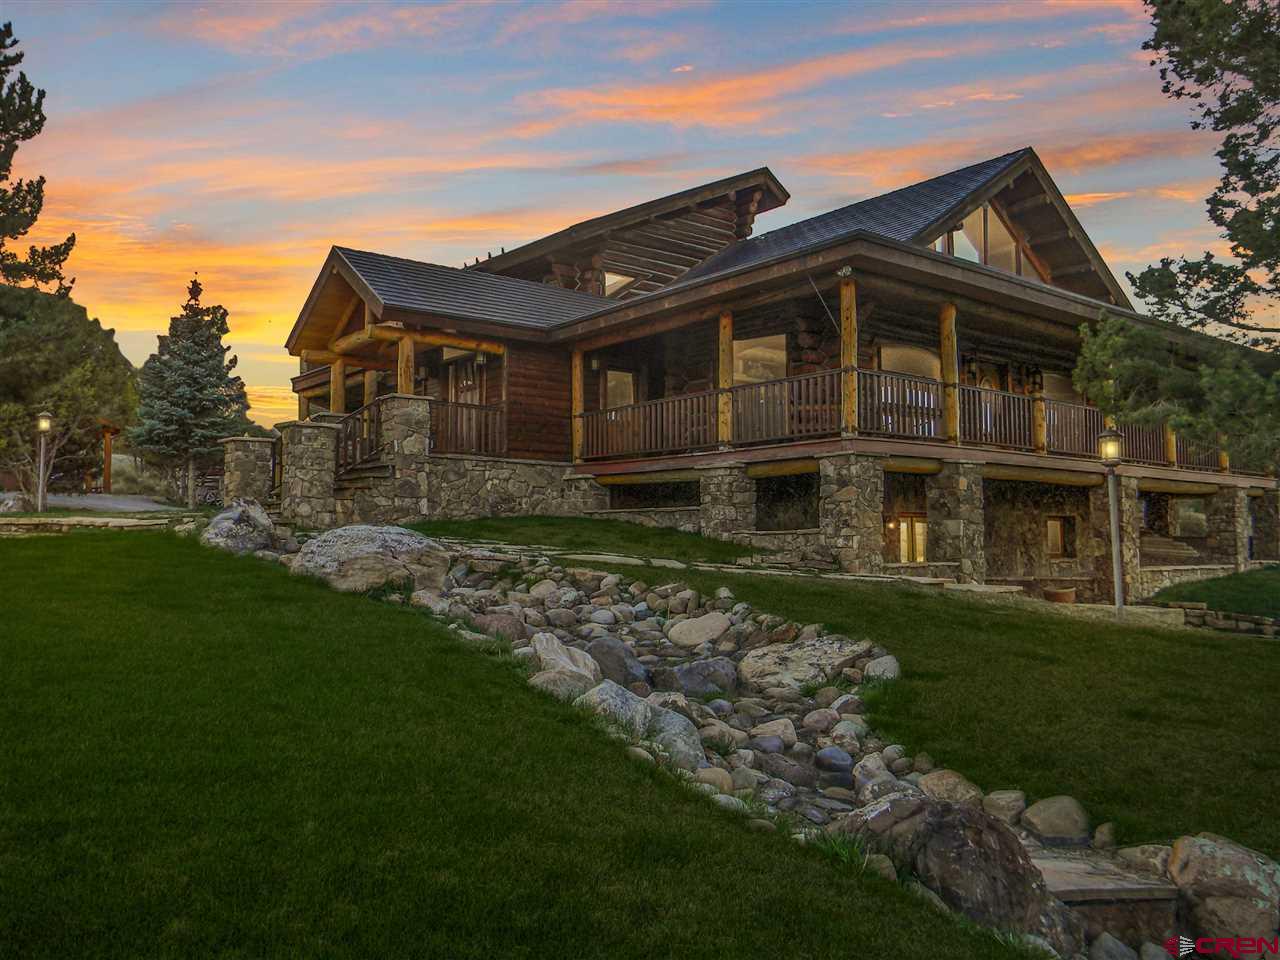 The ultimate Colorado mountain location w/ privacy & mountain views. Welcome home to Country Living on this 8 acre estate of open space and irrigation in beautiful Ridgway, CO. This home features 5 bedrooms, 4 bathrooms, and 8-car garage. This beautiful custom-built log home is fully equipped w/ horse stables and a 1740 sq ft pole barn for hay or equipment storage. Don’t forget to add the 4,495 sqft 8-car garage for the ultimate car enthusiast and the perfect venue for weddings & events! Amenities of the property include: Timbers that are kiln dried Douglas fir from Oregon, T&G blue pine ceilings, copper shingle roof, custom kitchen cabinets that are made of tobacco wood & maple. The living room floor is red/white reclaimed oak from the South. Italian made pizza oven in the kitchen & an underground vault w/ cedar interior lining in the basement of the home. Separate septic system for the barn & house, walk-in freezer & more!